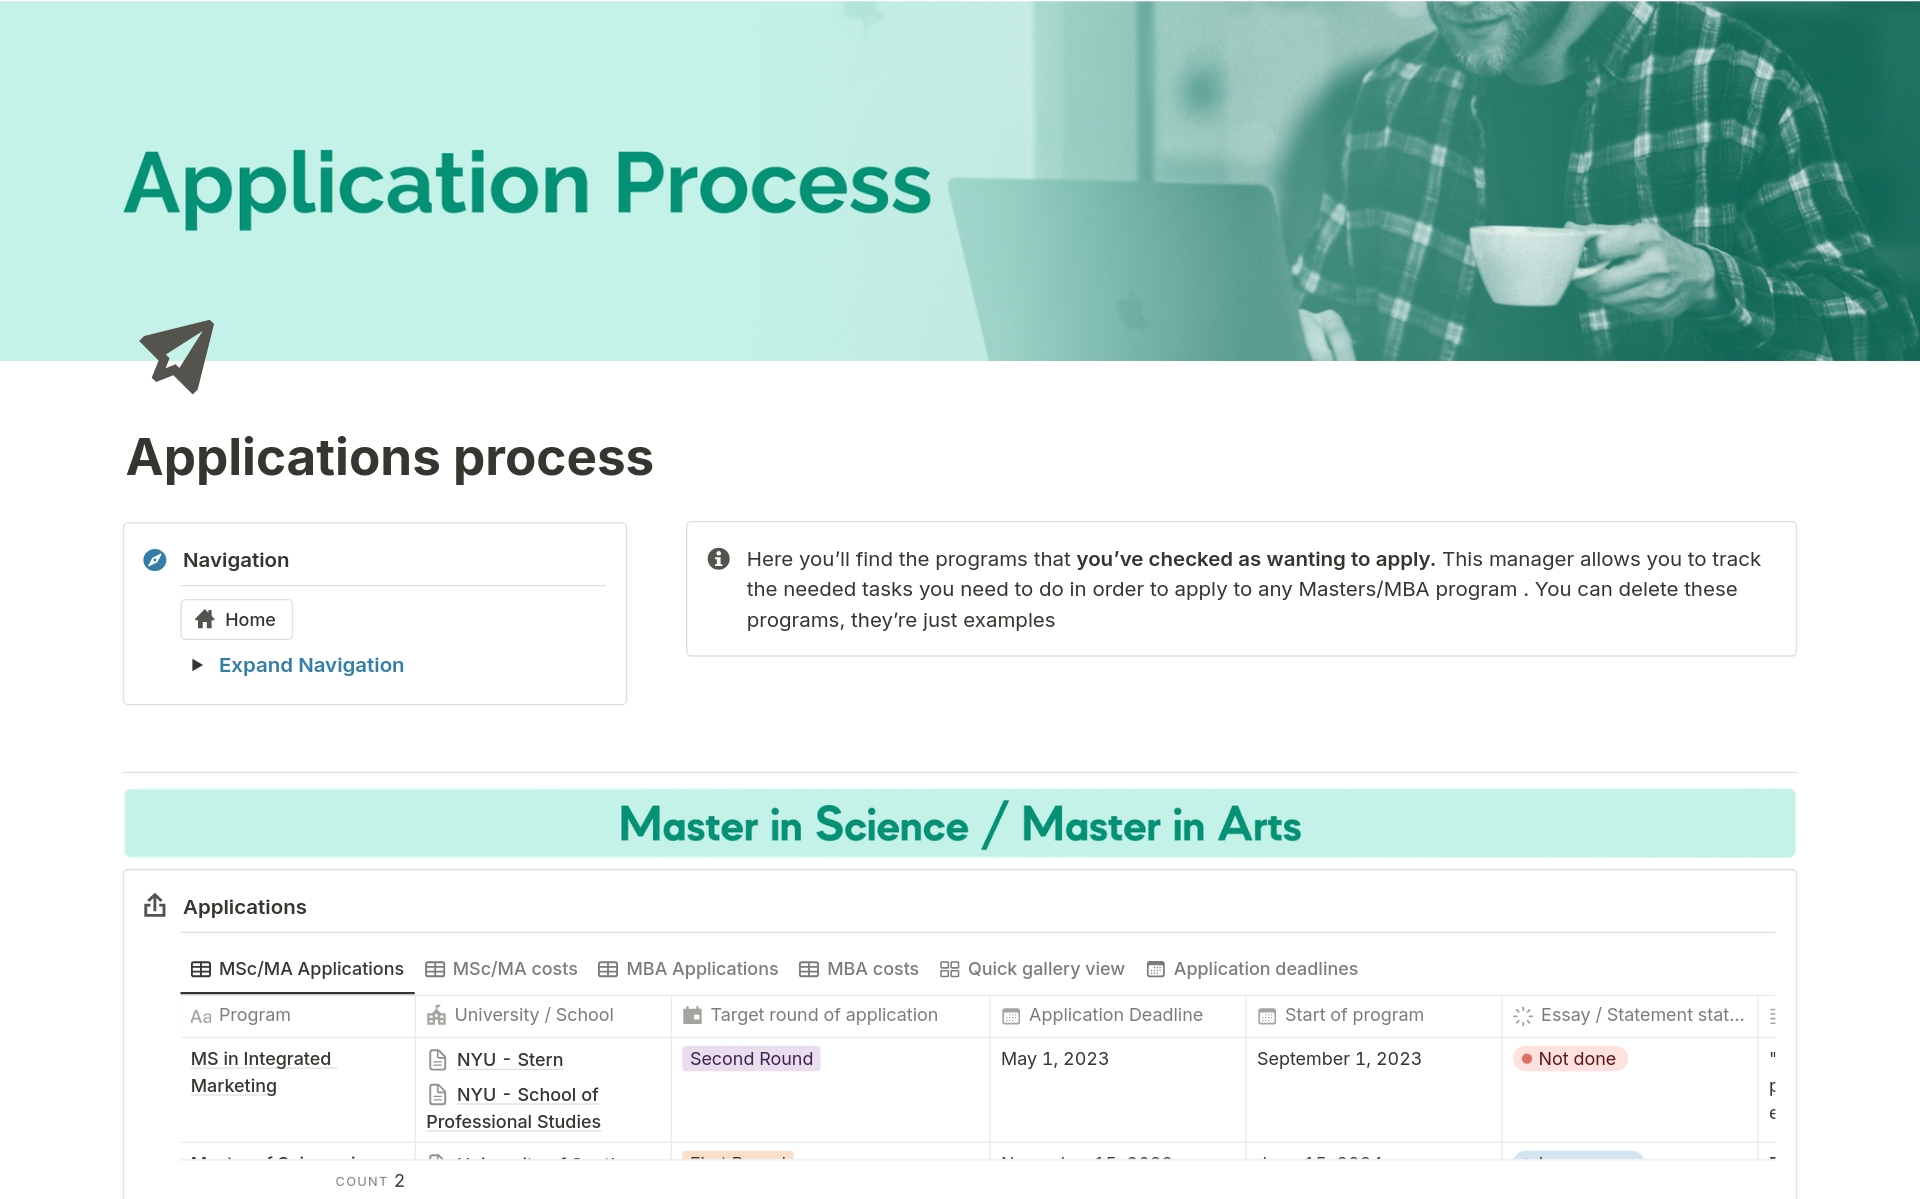 Let's you completely manage your Master's/MBA search, application, and enrollment processes.